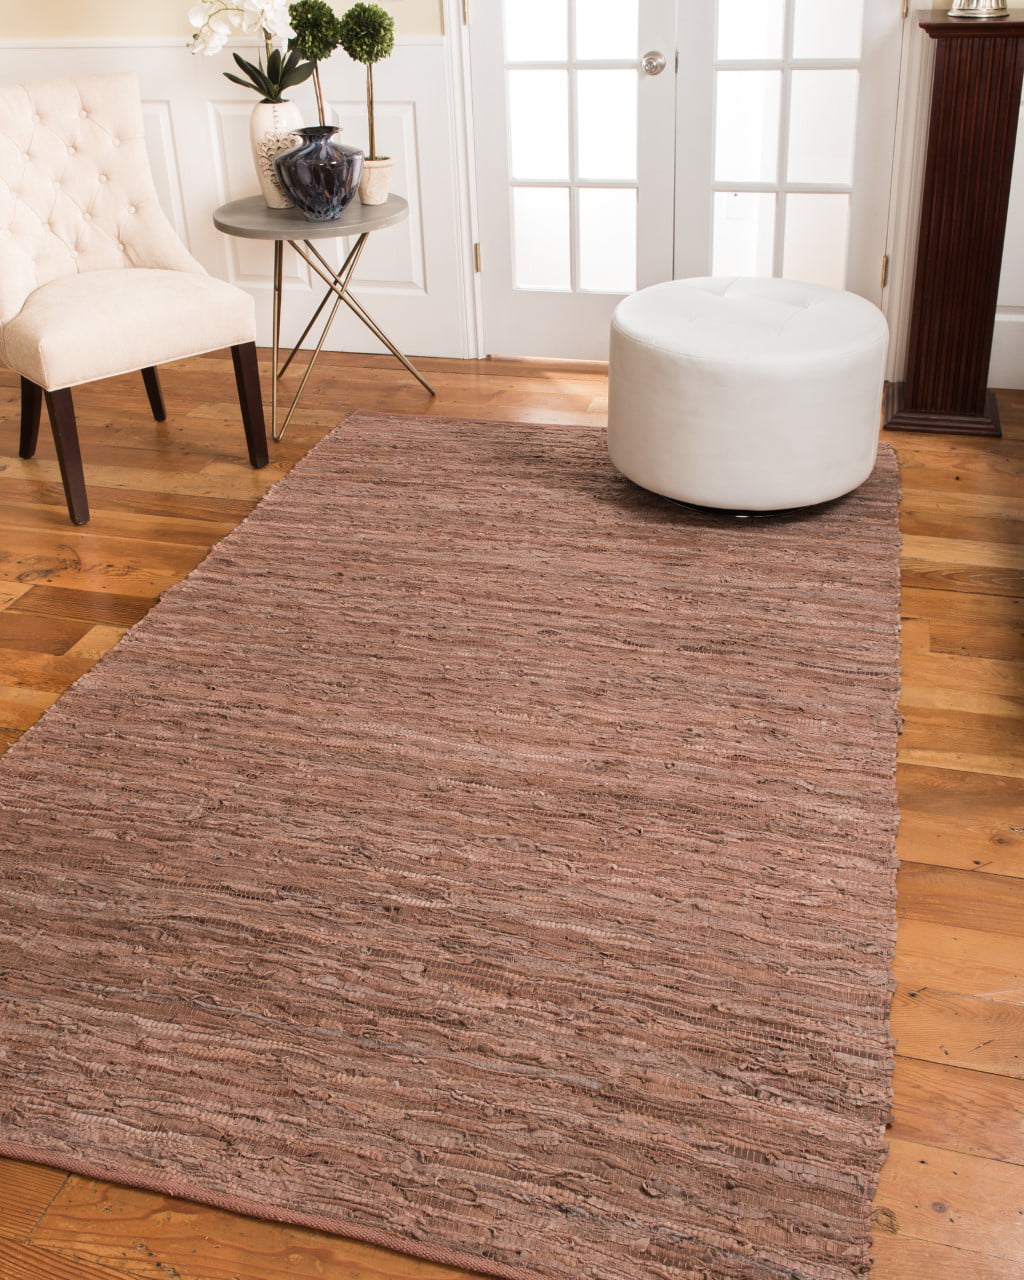 Natural Area Rugs Biscayne Pinkish, Leather Throw Rugs